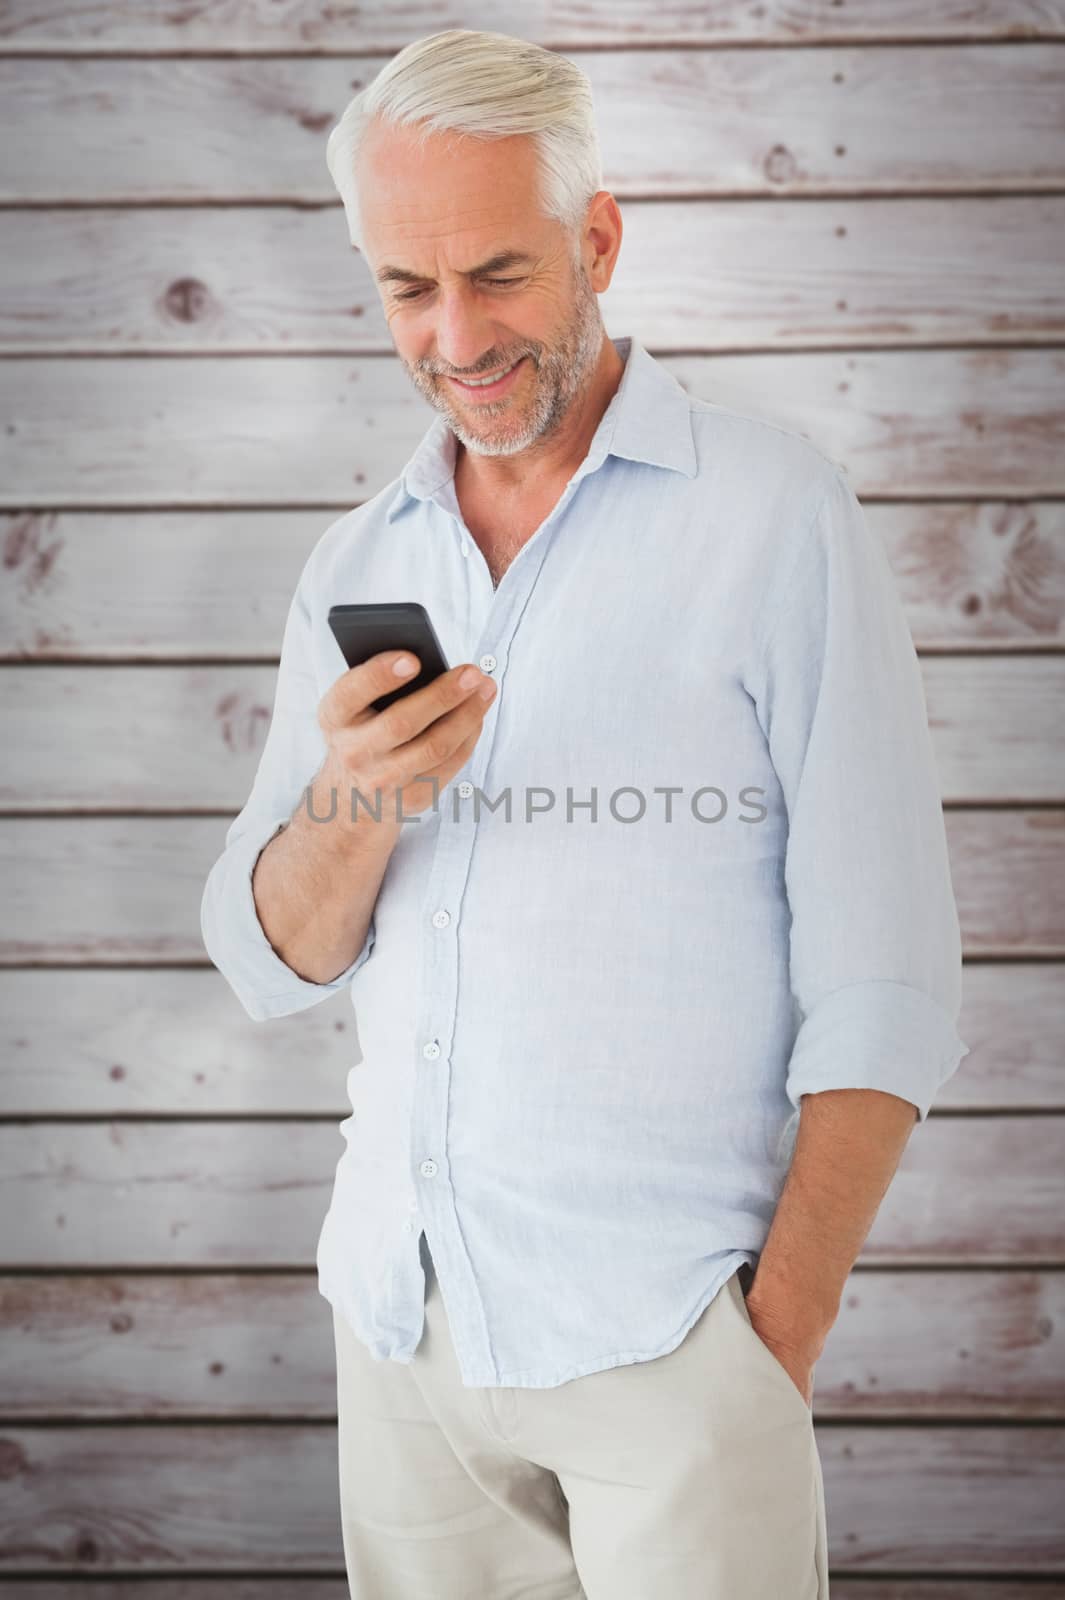 Smiling man sending a text message against wooden planks